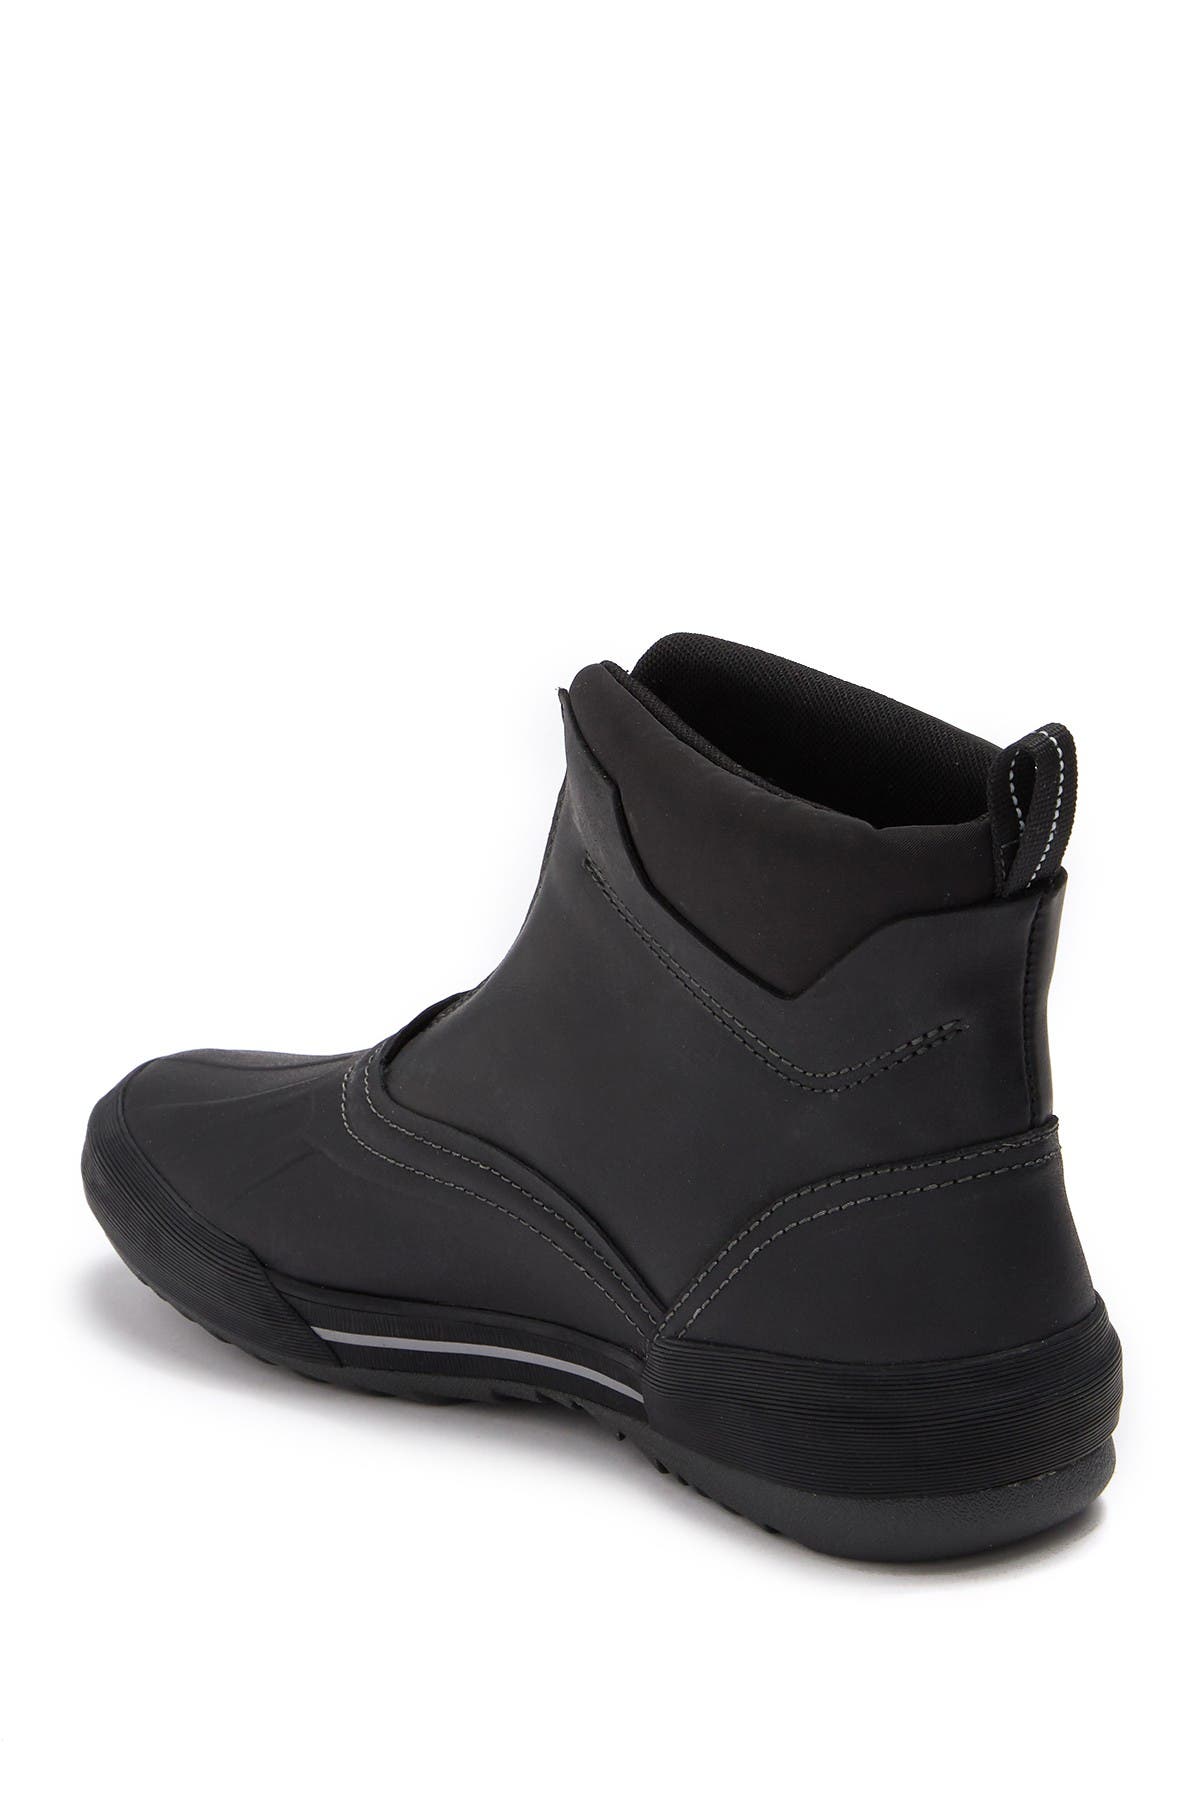 bowman top waterproof leather boots